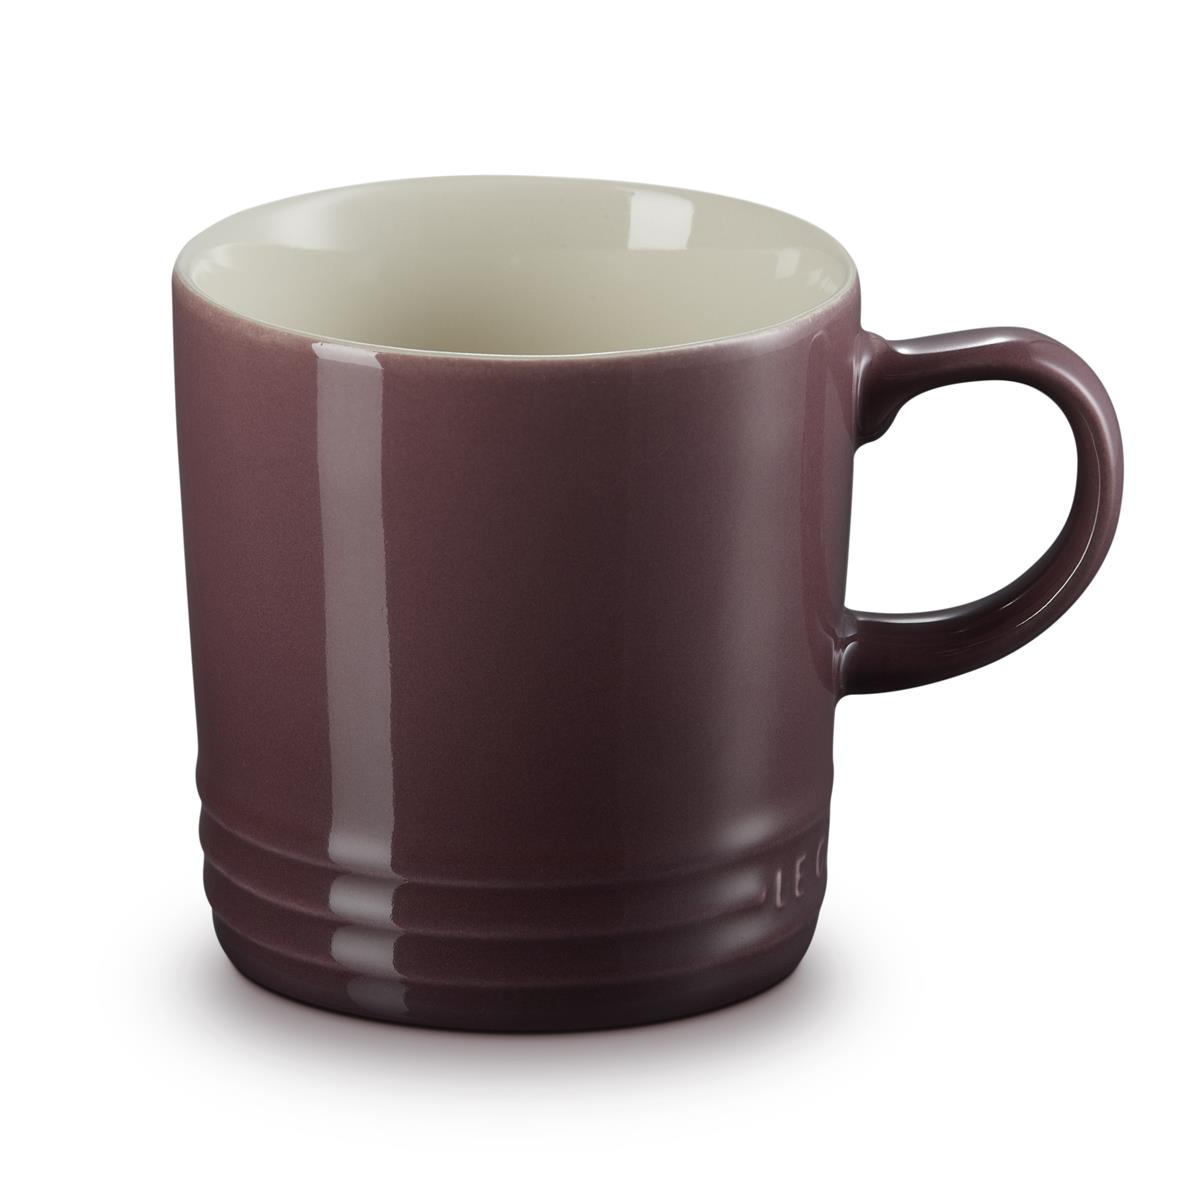 Are the bottoms of the mugs completely flat?